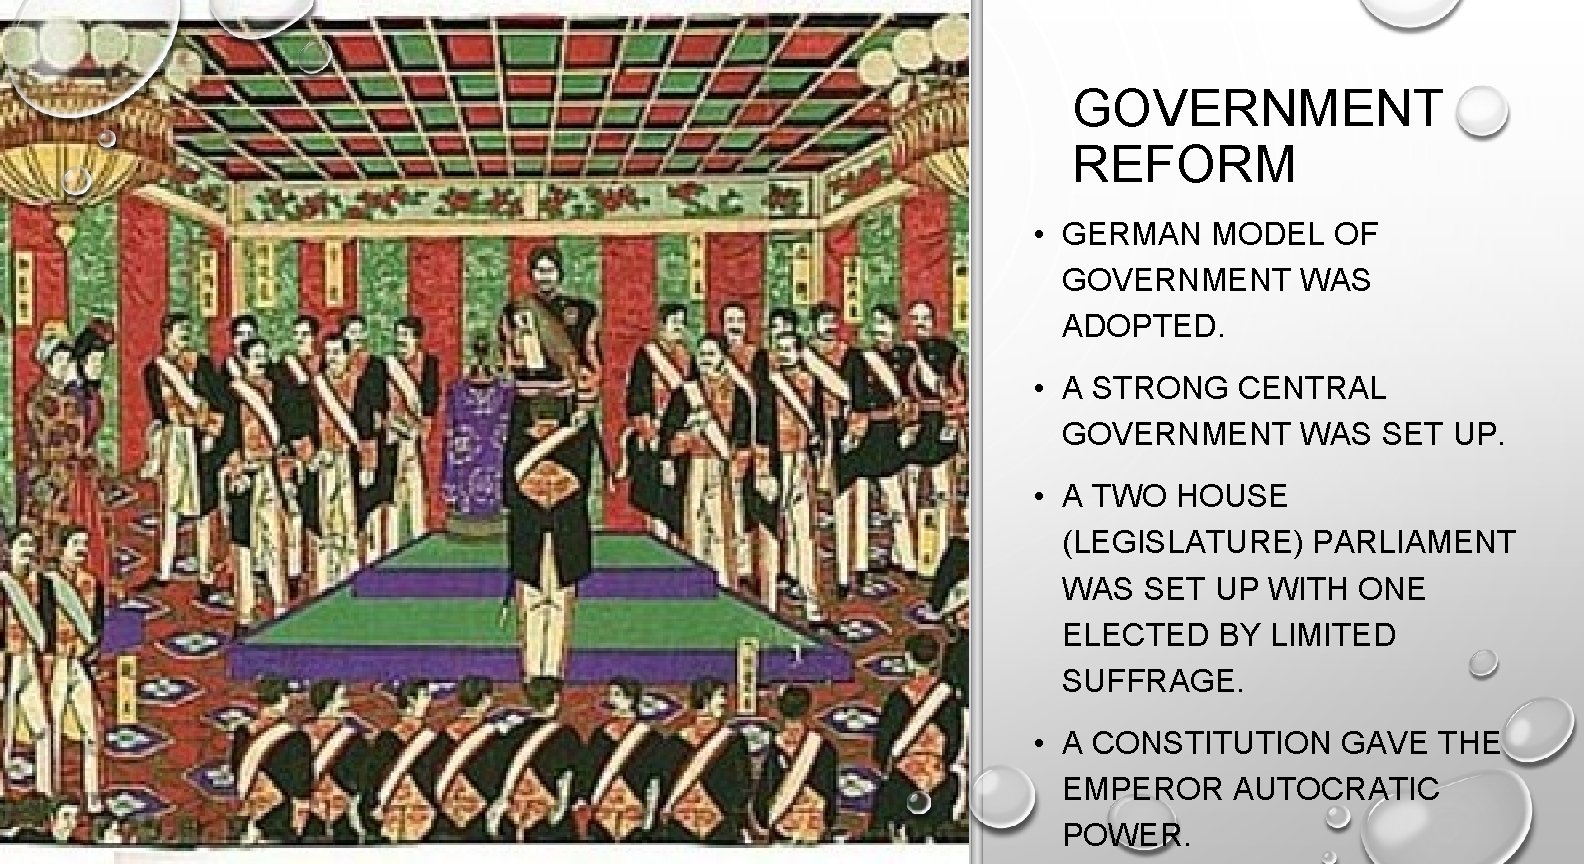 GOVERNMENT REFORM • GERMAN MODEL OF GOVERNMENT WAS ADOPTED. • A STRONG CENTRAL GOVERNMENT